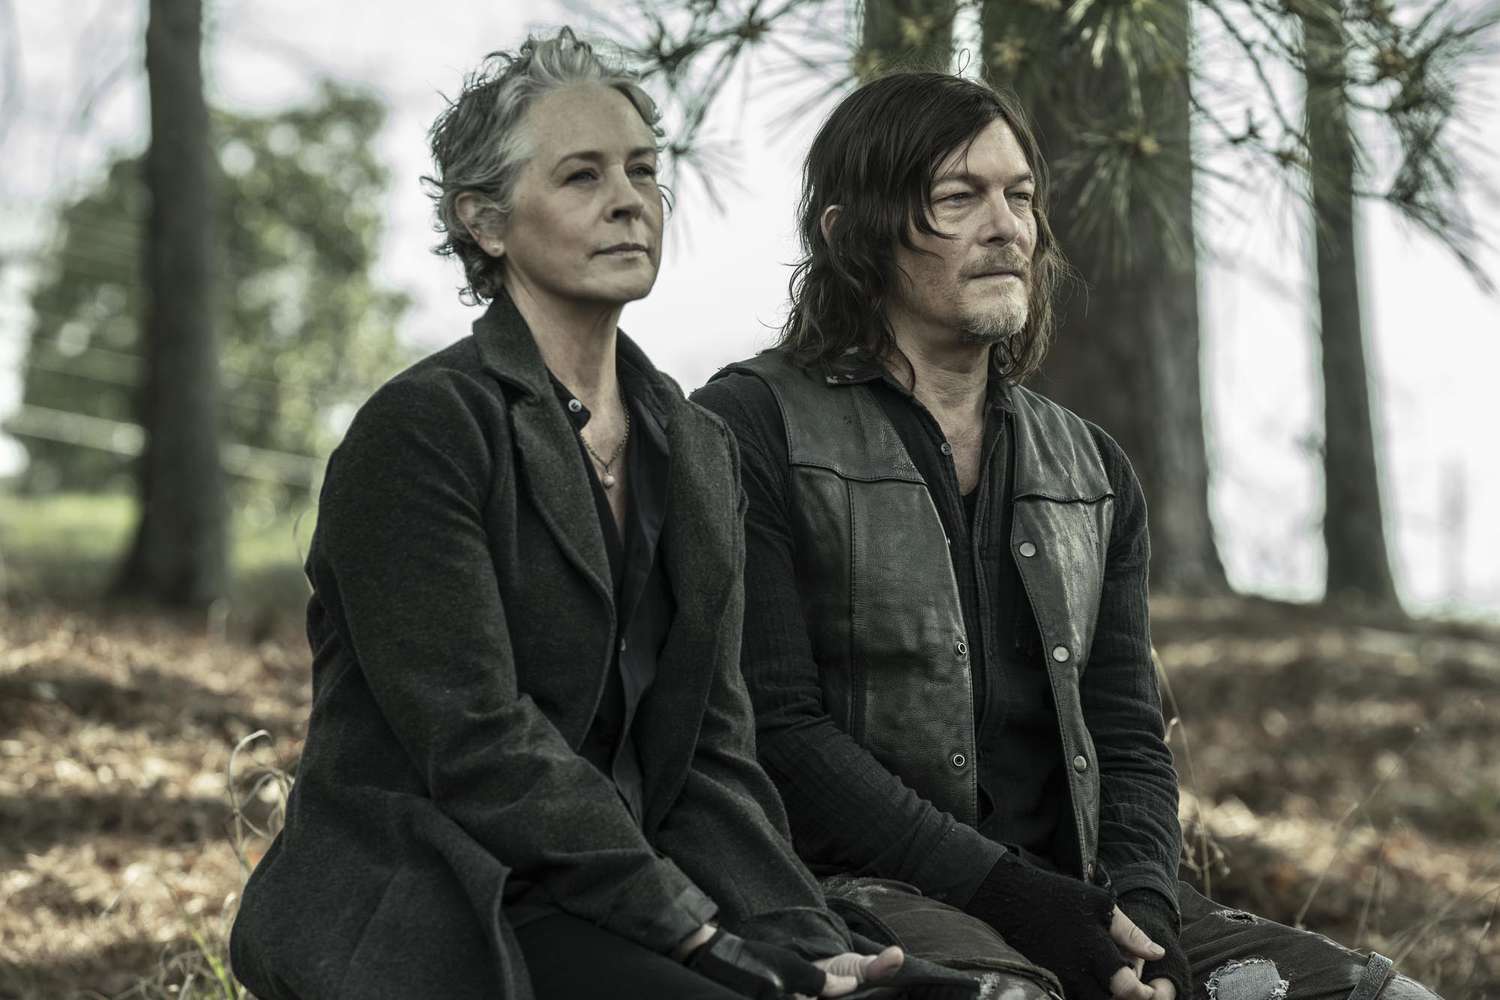 Norman Reedus on 'The Walking Dead' scene that 'felt like a funeral' - Entertainment Weekly News